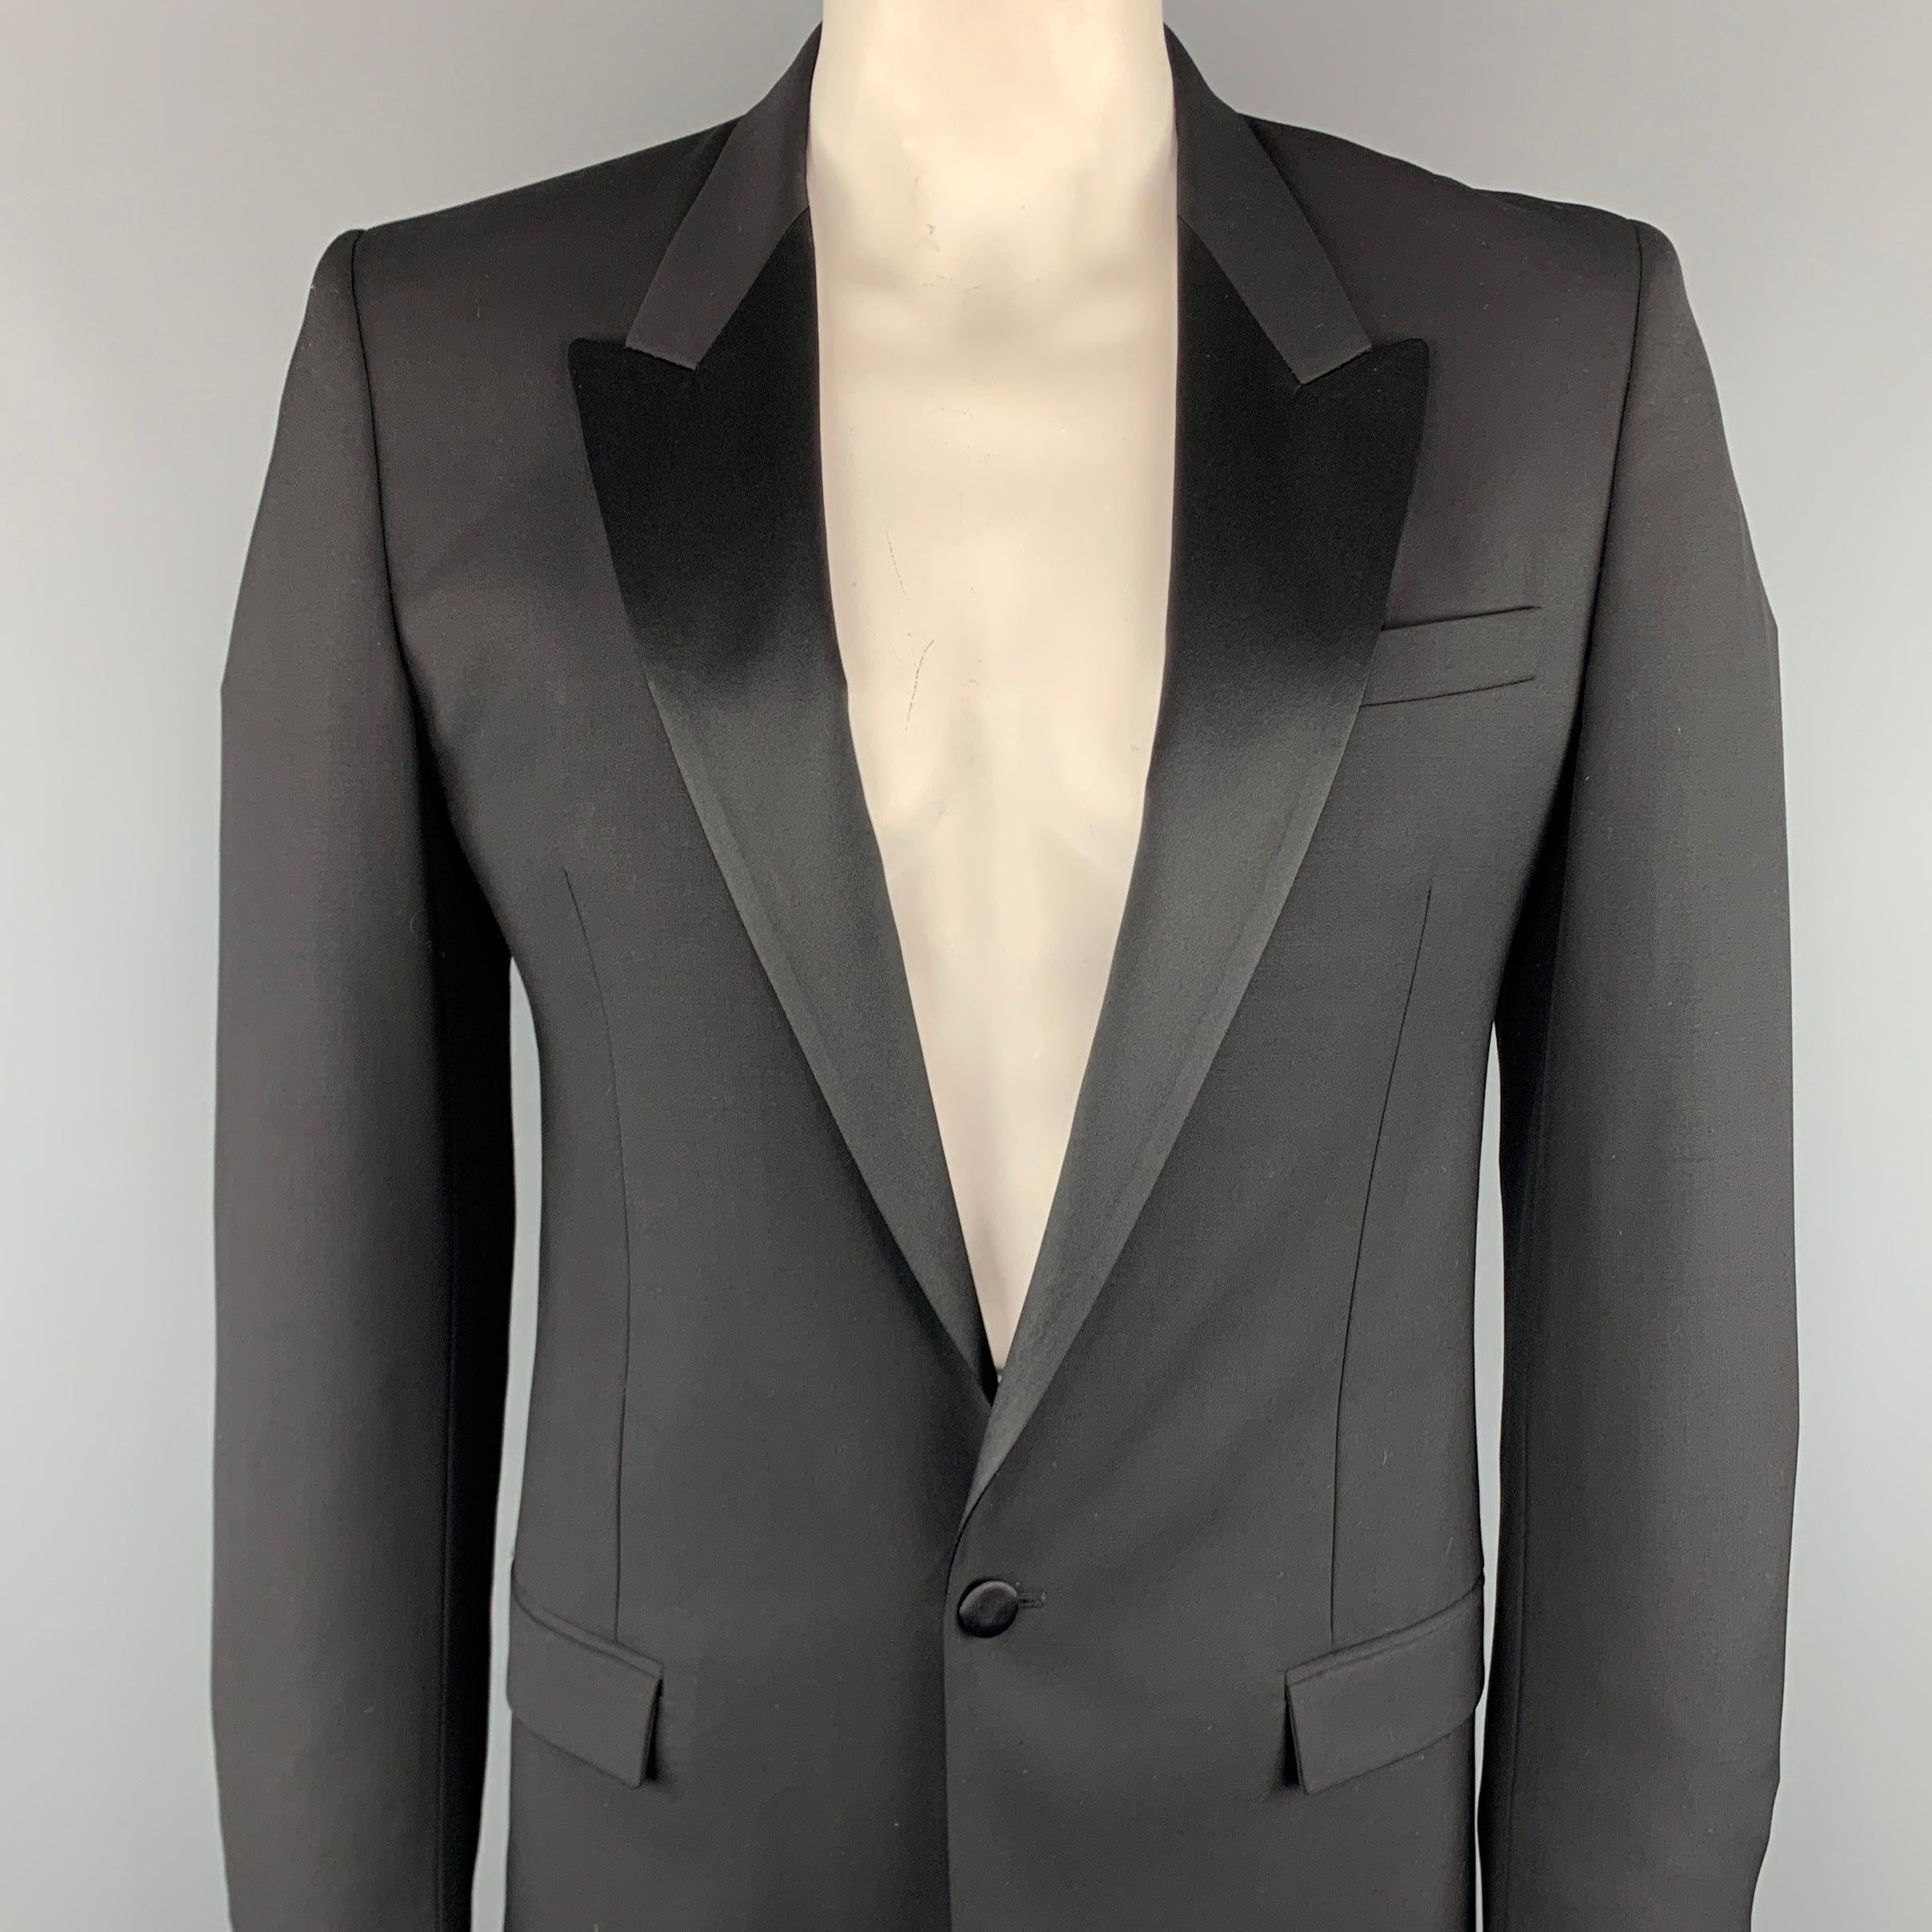 MARC JACOBS tuxedo sport coat comes in a black wool with a peak lapel and a single button closure. Made in Italy.Excellent Pre-Owned Condition.
 

Marked:   IT 52 Professionally Altered to US40 
 
 

Measurements: 
 
Shoulder: 17.5 inches 
Chest: 40